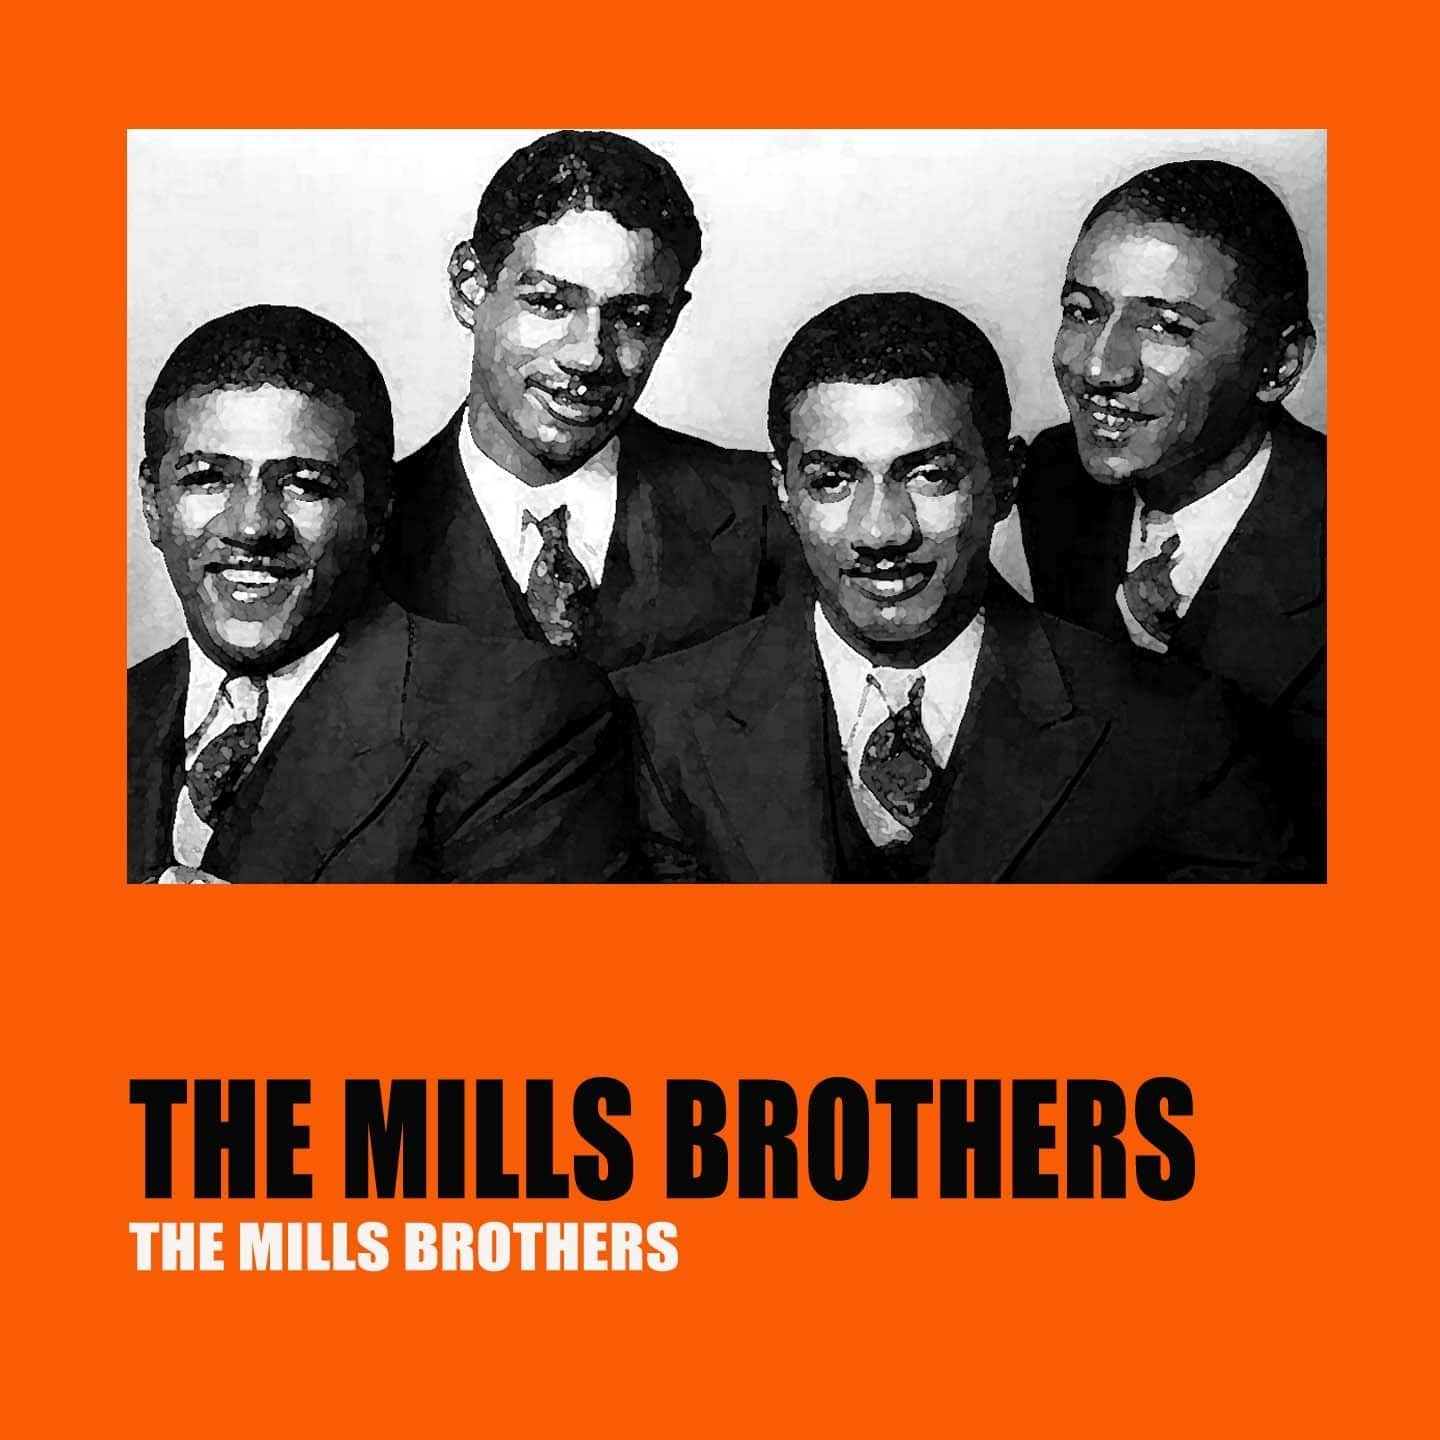 The Mills Brothers Artwork Wallpaper